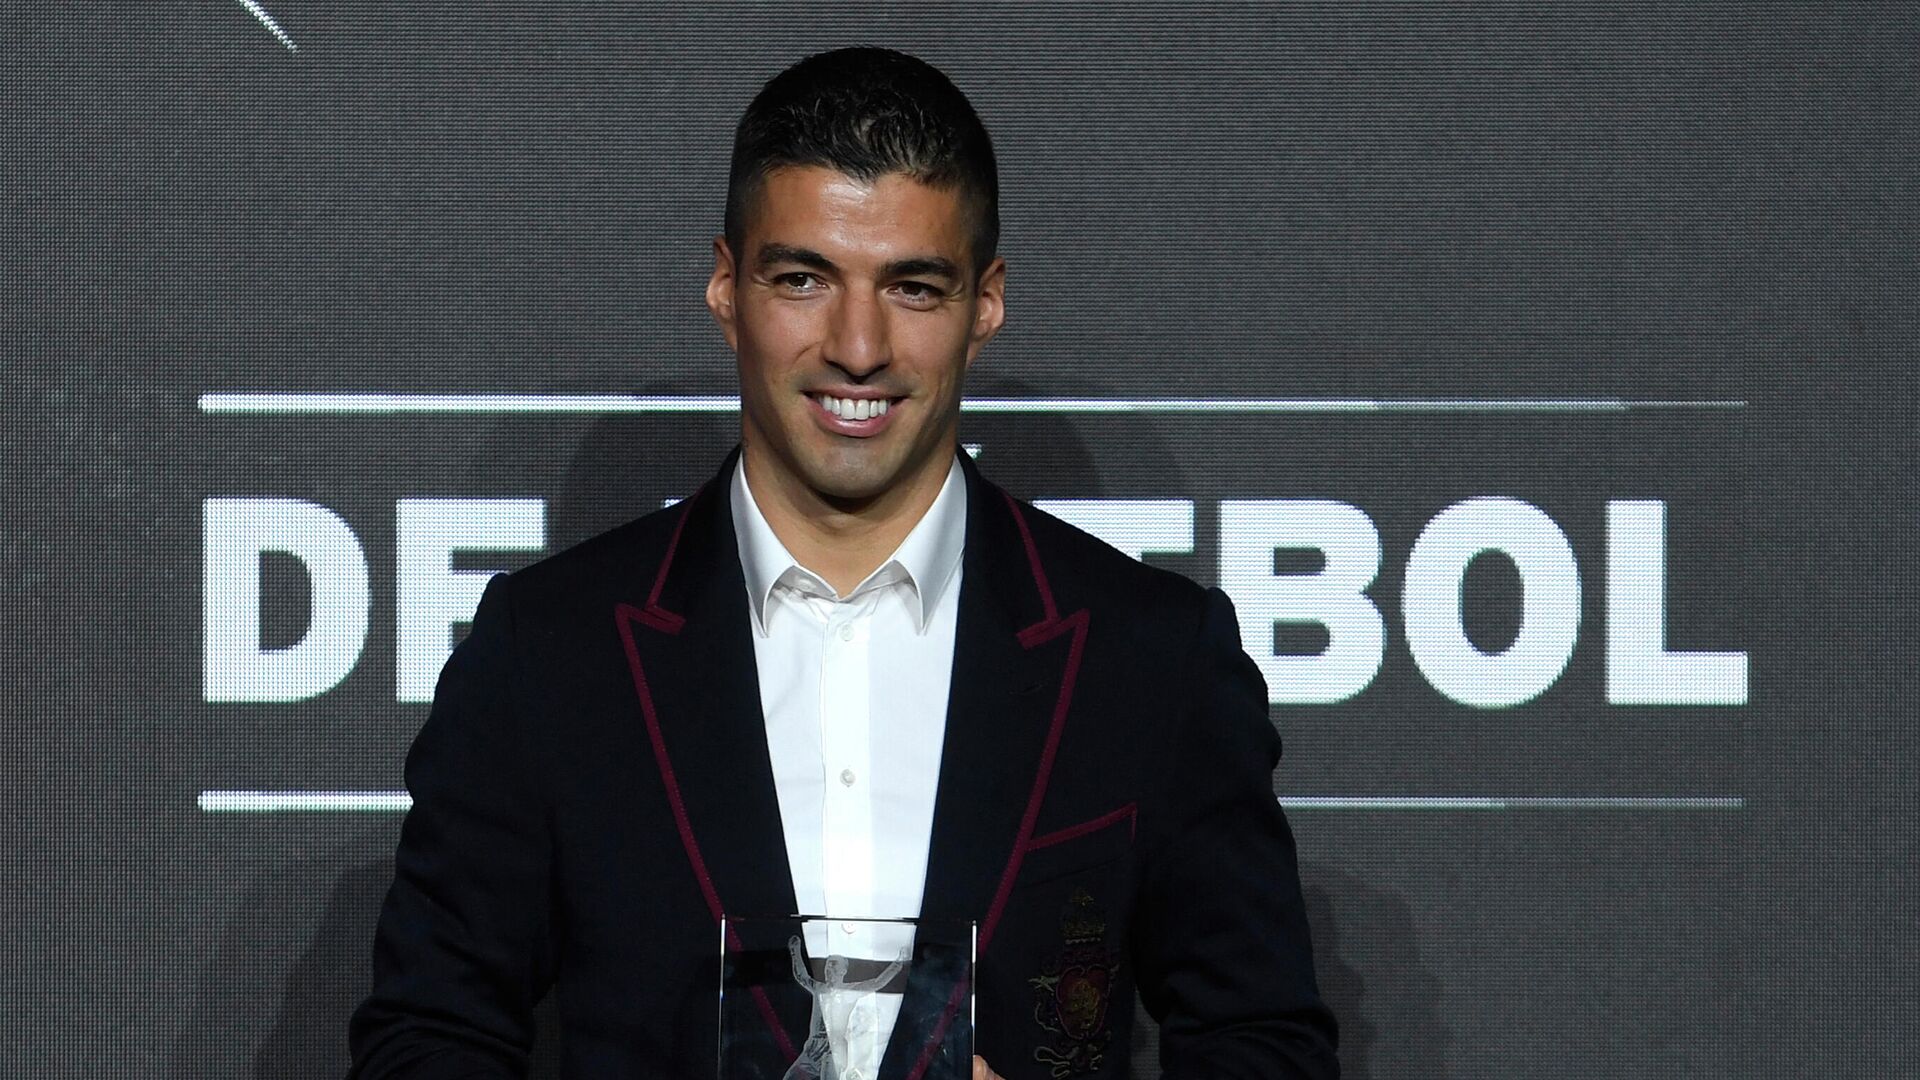 Atletico Madrid's Argentinian forward Luis Suarez poses after receiving the Di Stefano award for La Liga's best player, during the Football Marca Awards in Barcelona on November 29, 2021. (Photo by PIERRE-PHILIPPE MARCOU / AFP) - РИА Новости, 1920, 29.11.2021